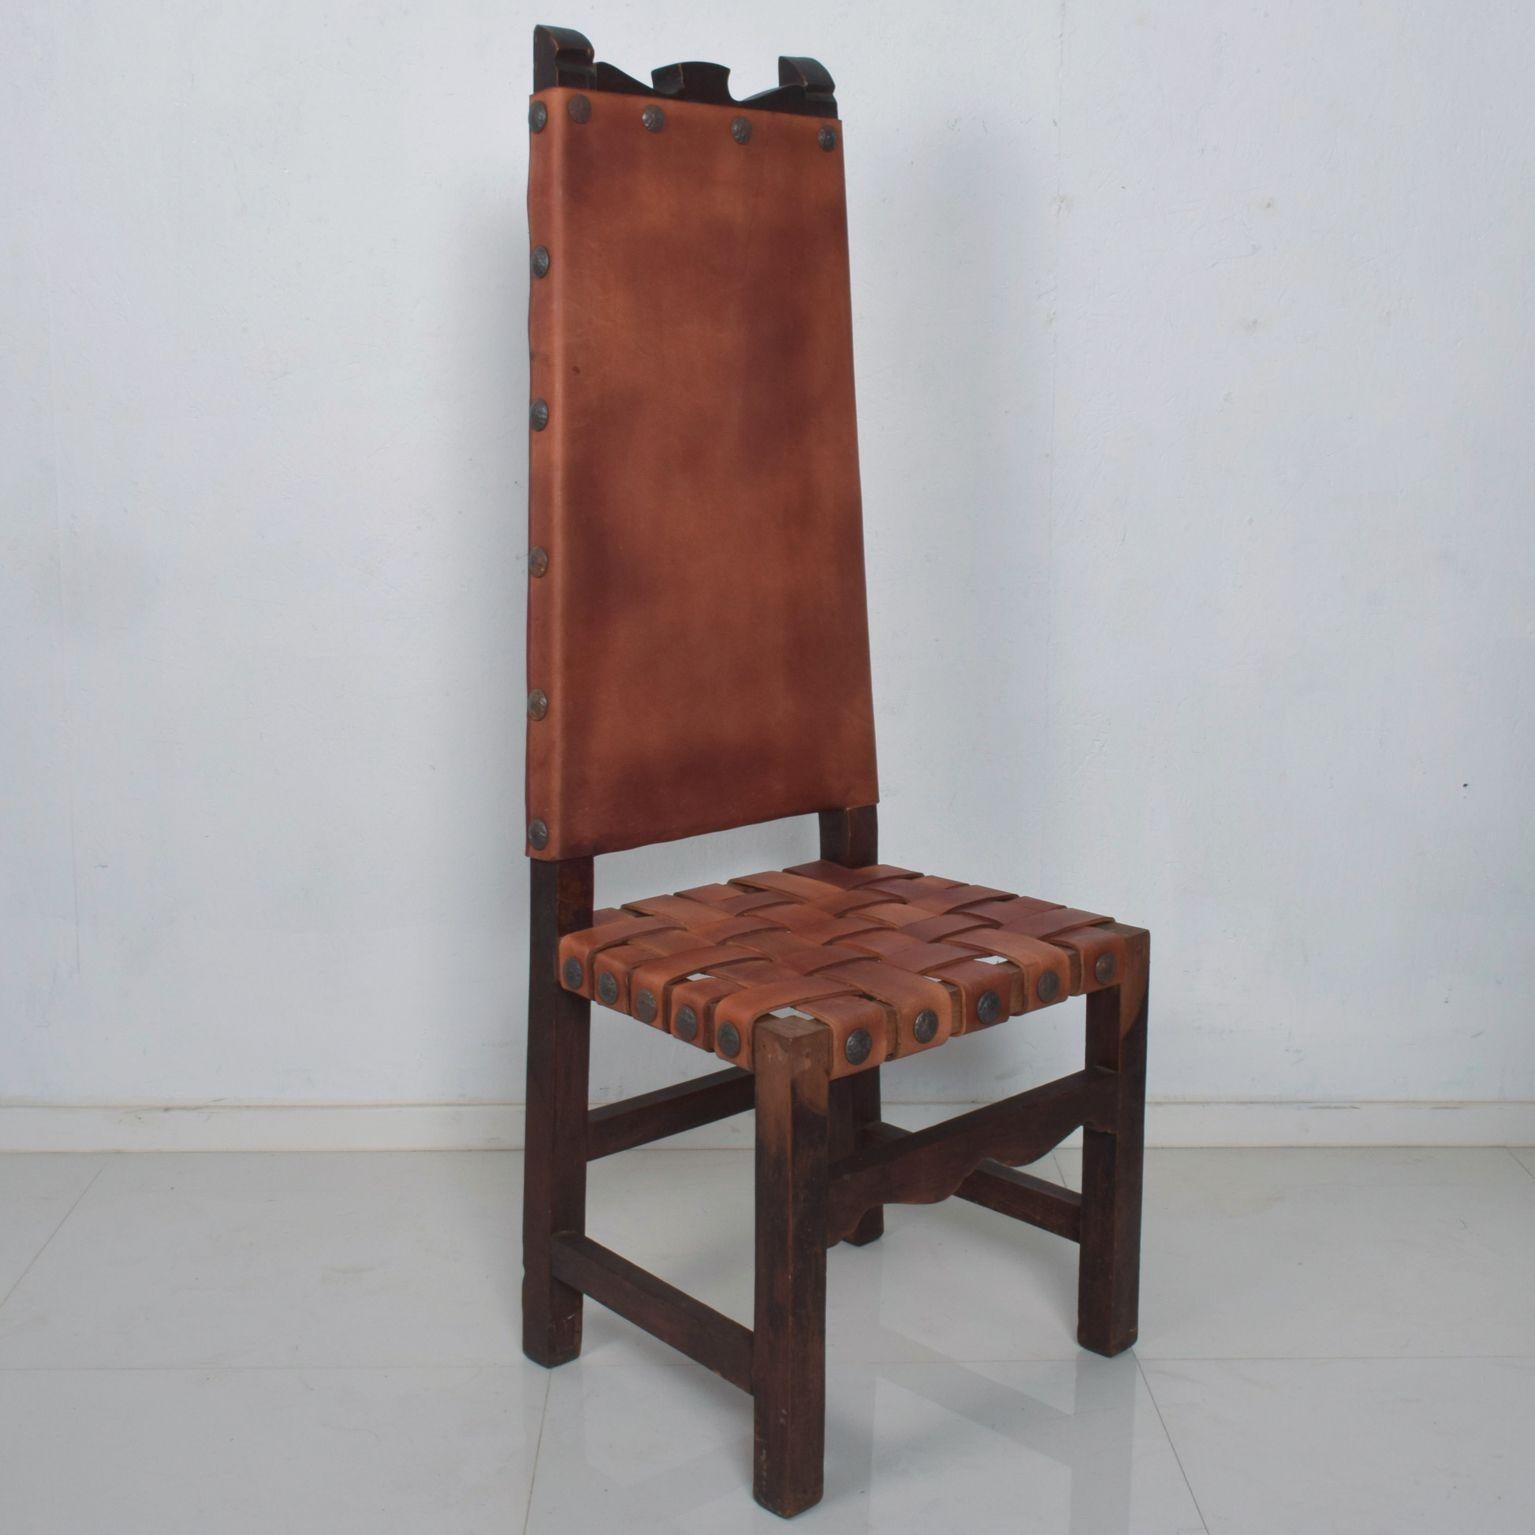 Mexican SPANISH Colonial TALL Wood Chairs Woven Saddle Leather style Luis BARRAGAN